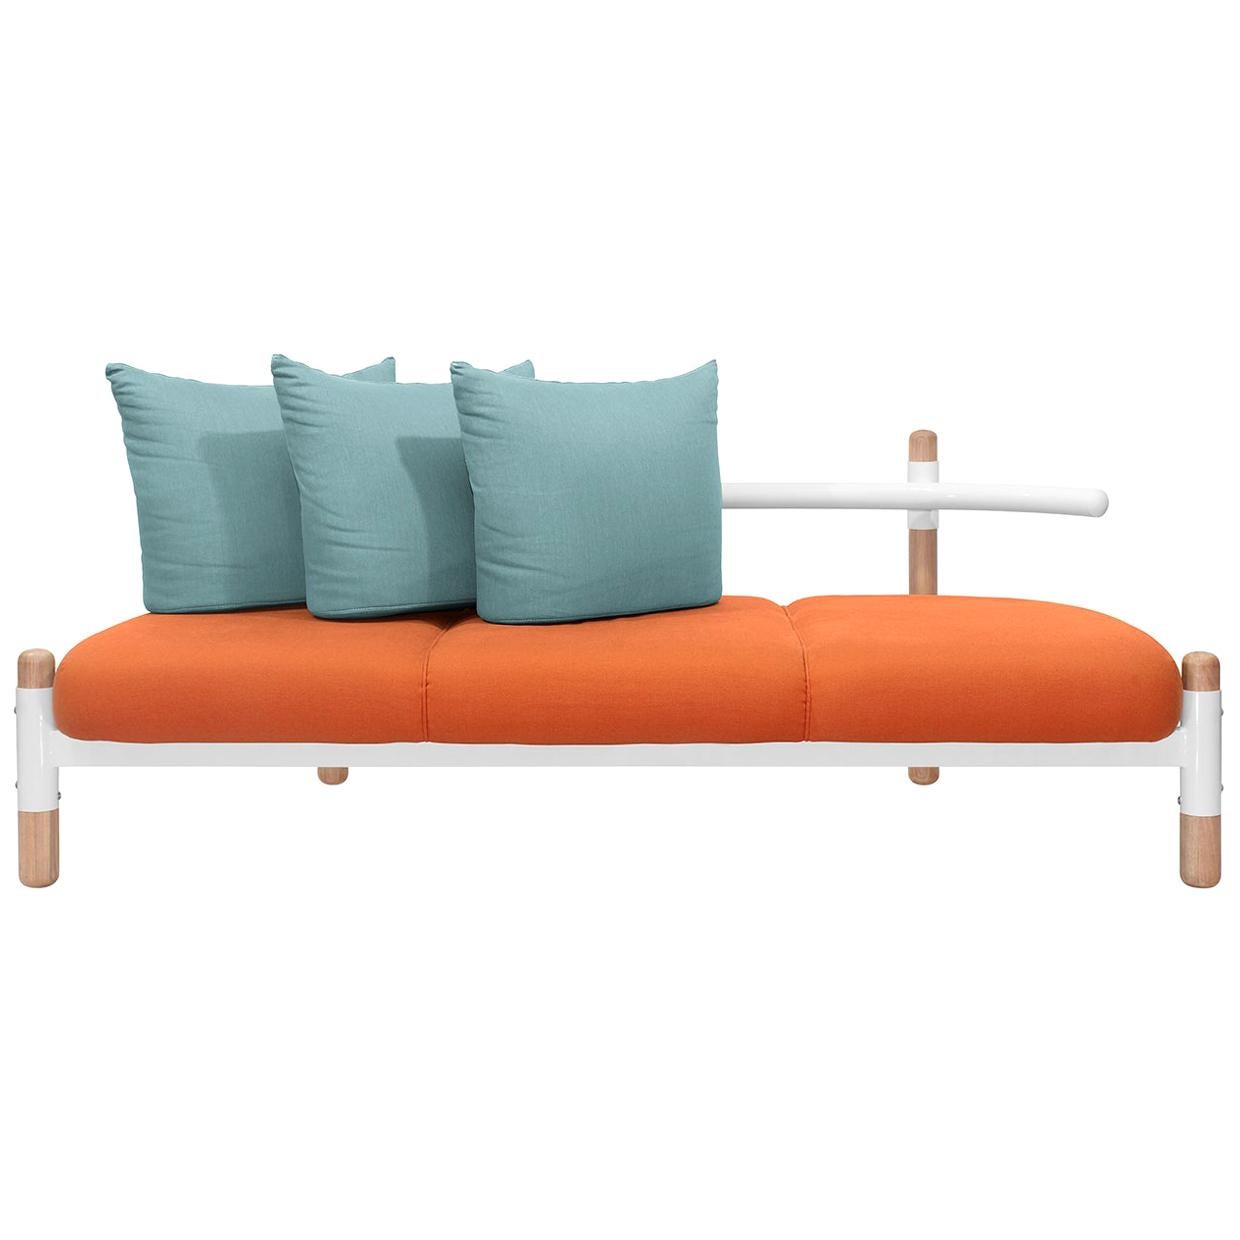 Tomato PK15 Three-Seat Sofa, Carbon Steel Structure & Wood Legs by Paulo Kobylka